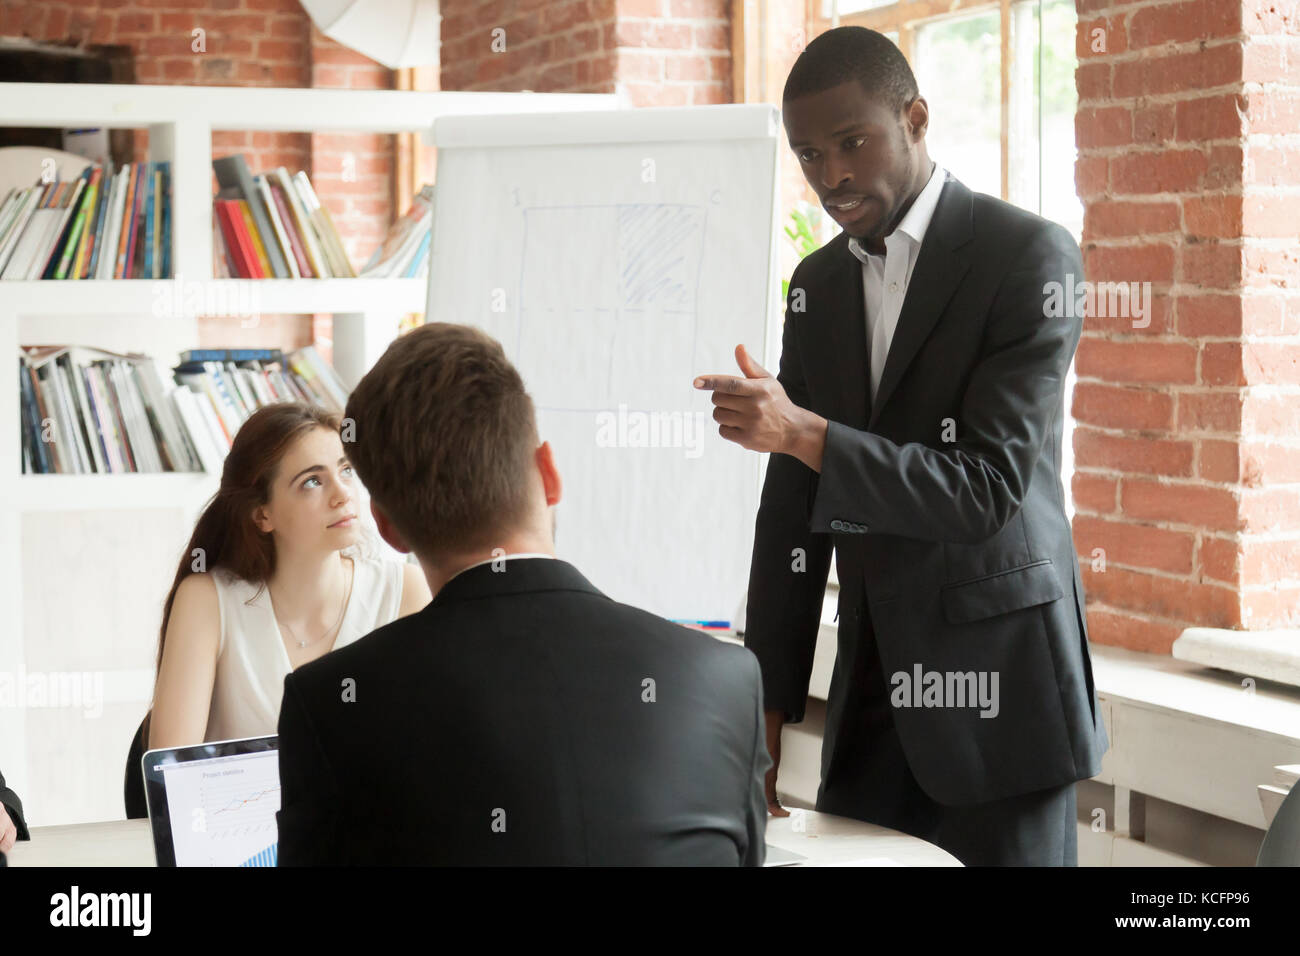 African American employee behaving rudely during briefing meeting. Disgruntled corporate worker expressing frustration to his coworkers. Angry busines Stock Photo